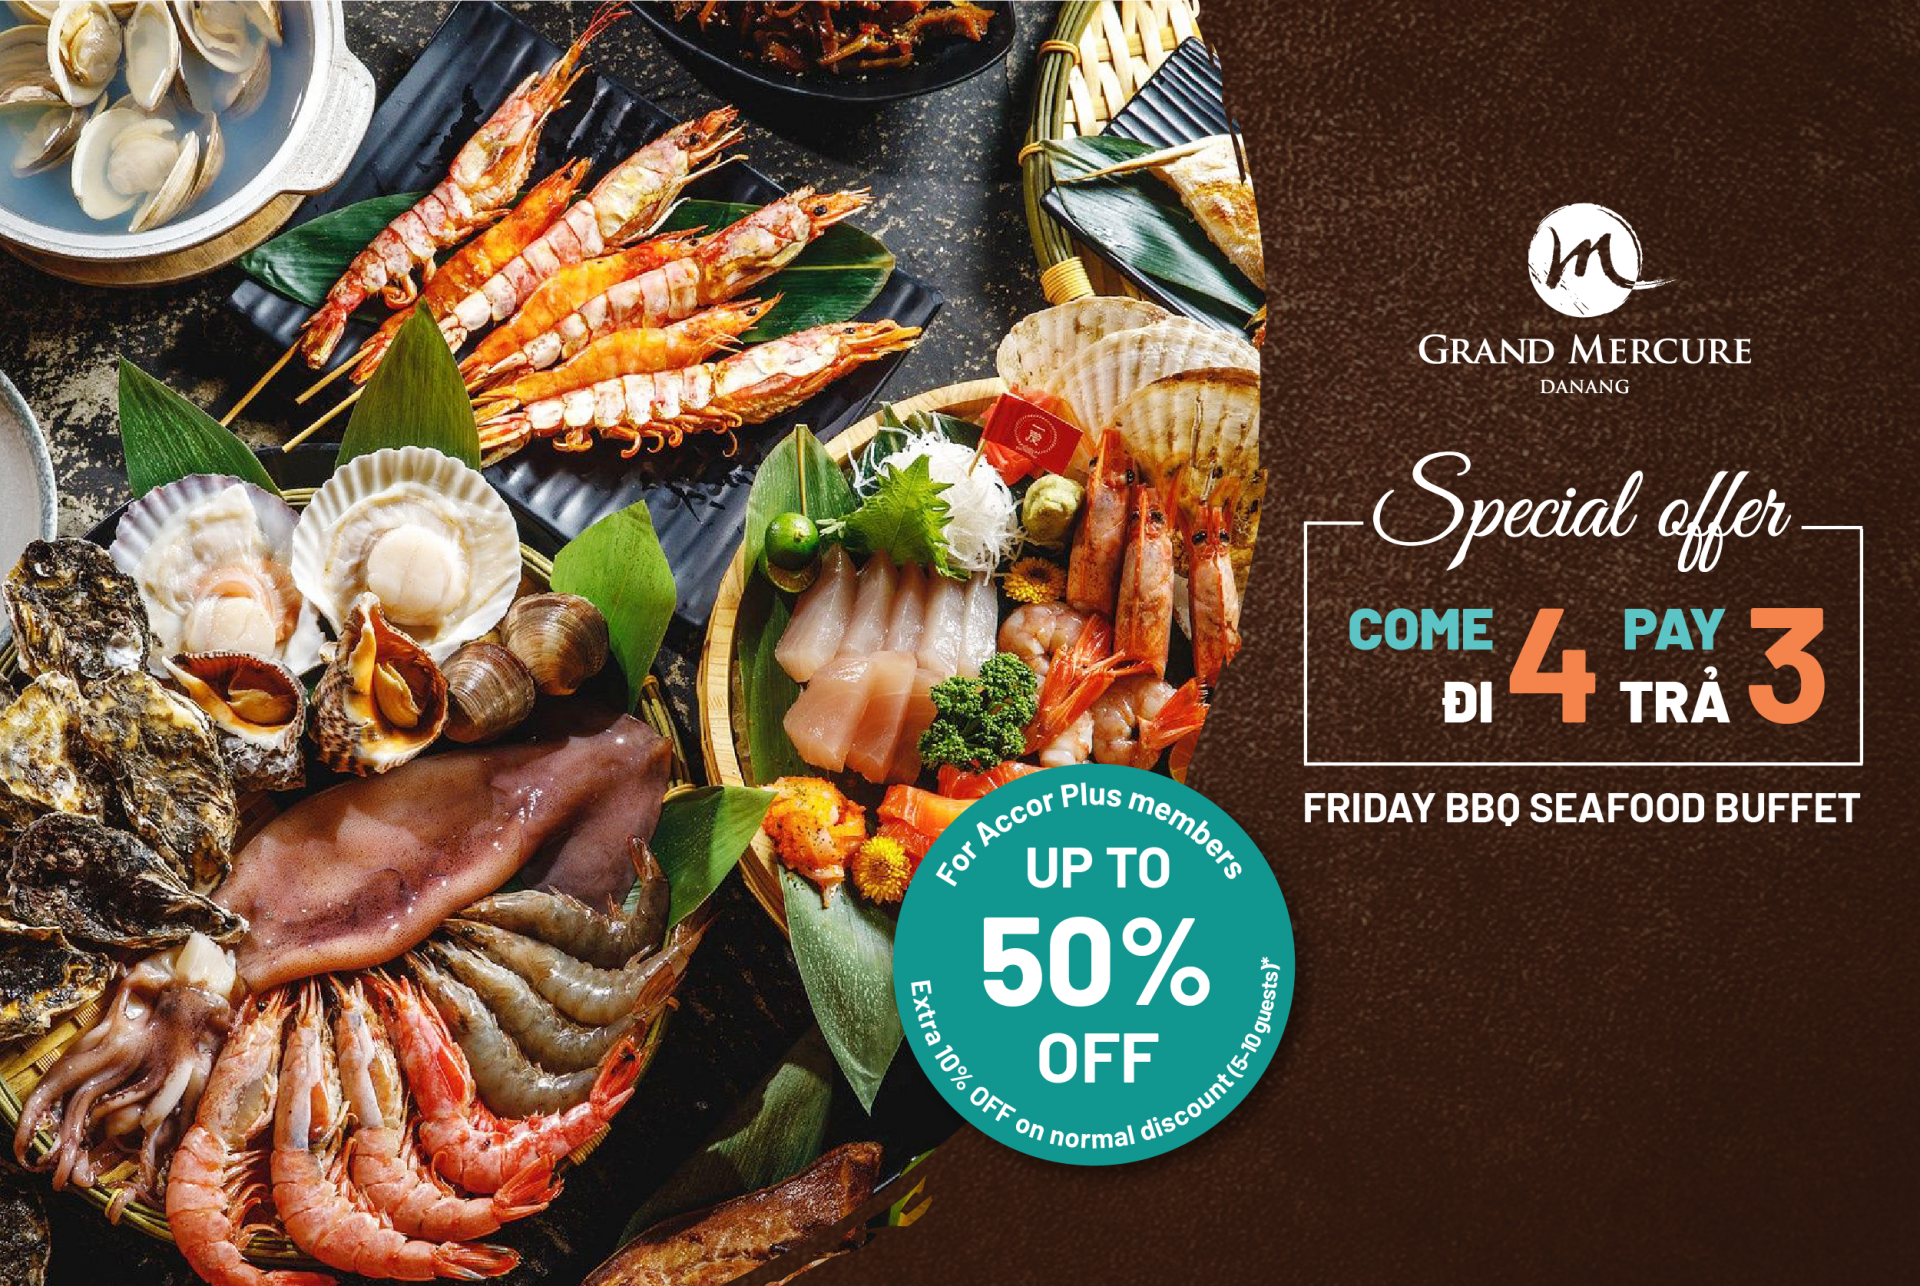 dine 4 pay 3 friday bbq seafood buffet at grand mercure danang